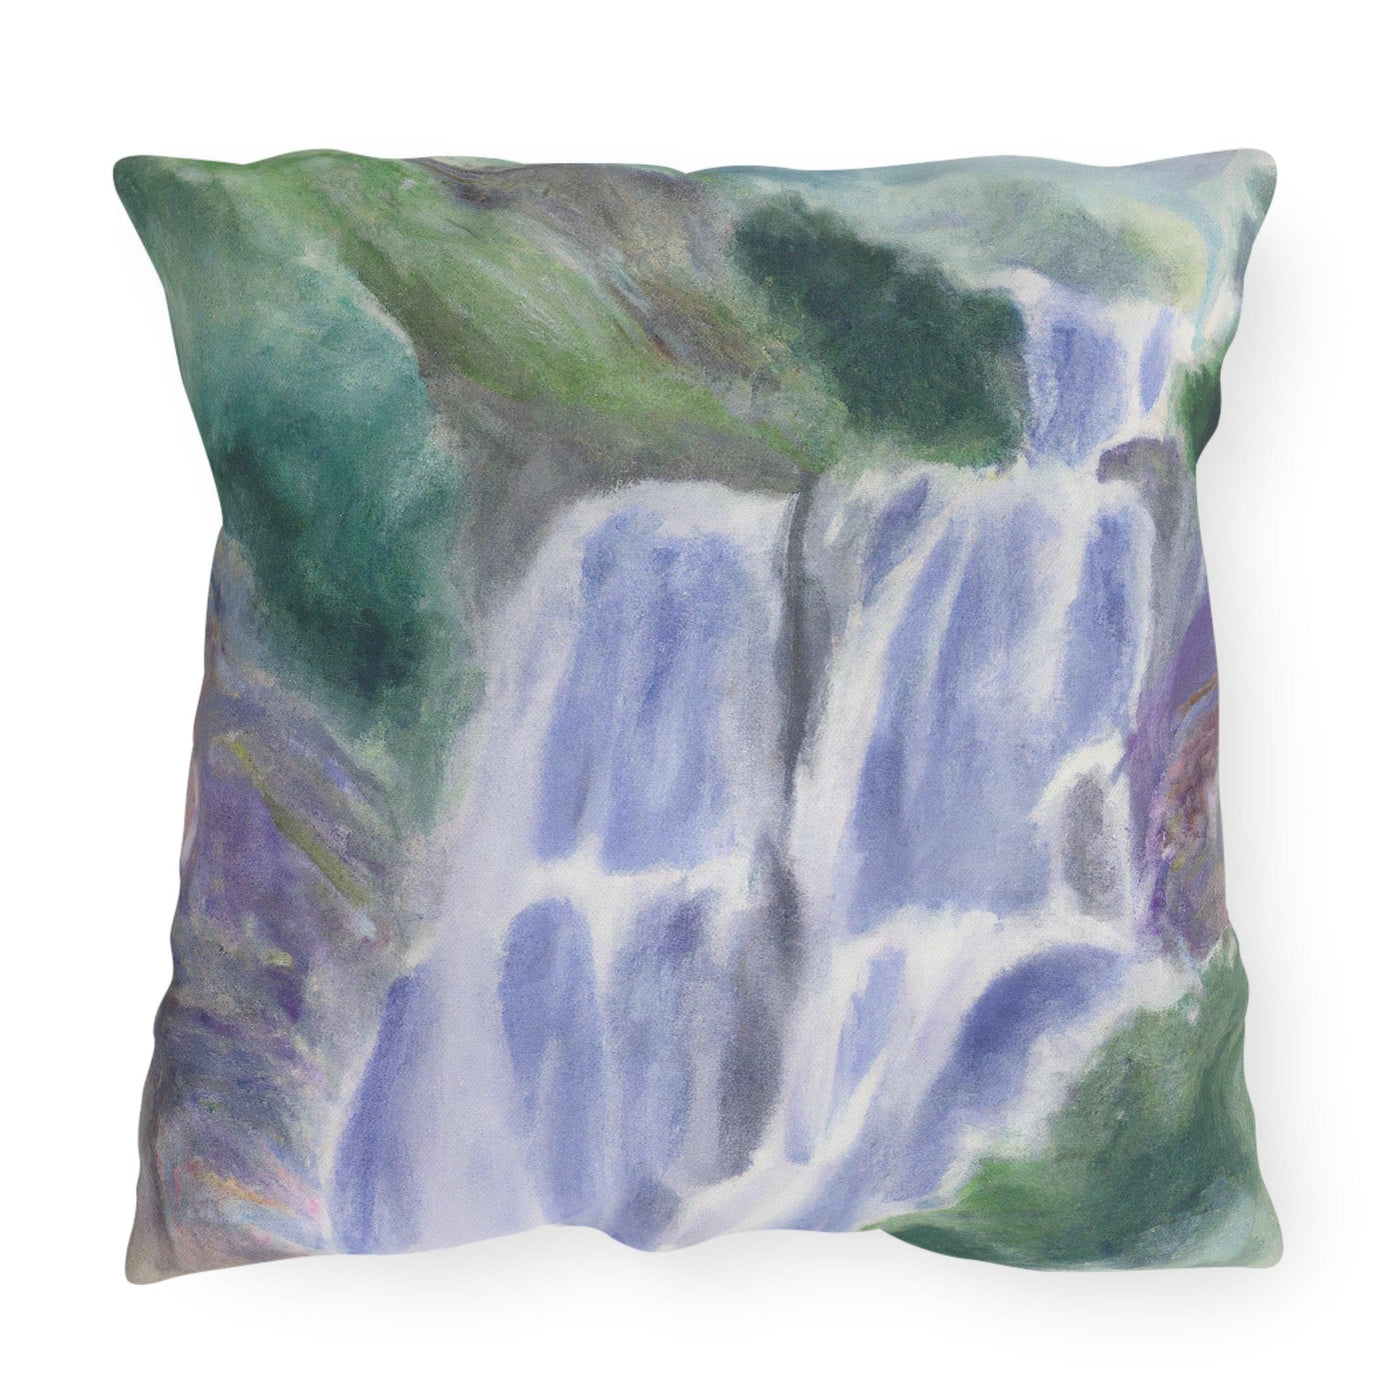 Decorative Outdoor Pillows With Zipper - Set Of 2 Purple Watercolor Waterfall